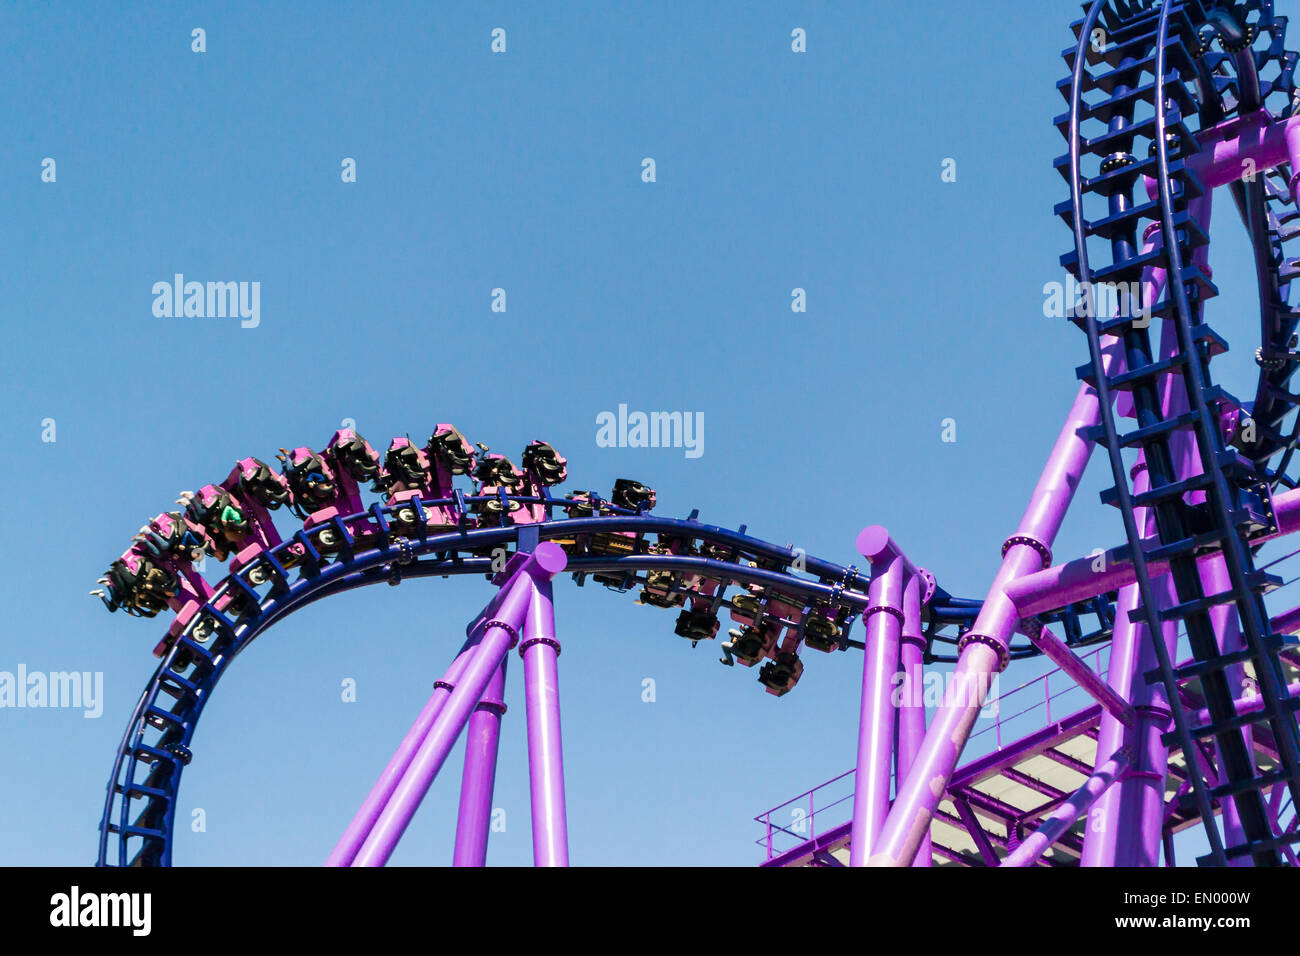 People riding a purple rollercoaster against a blue sky Stock Photo